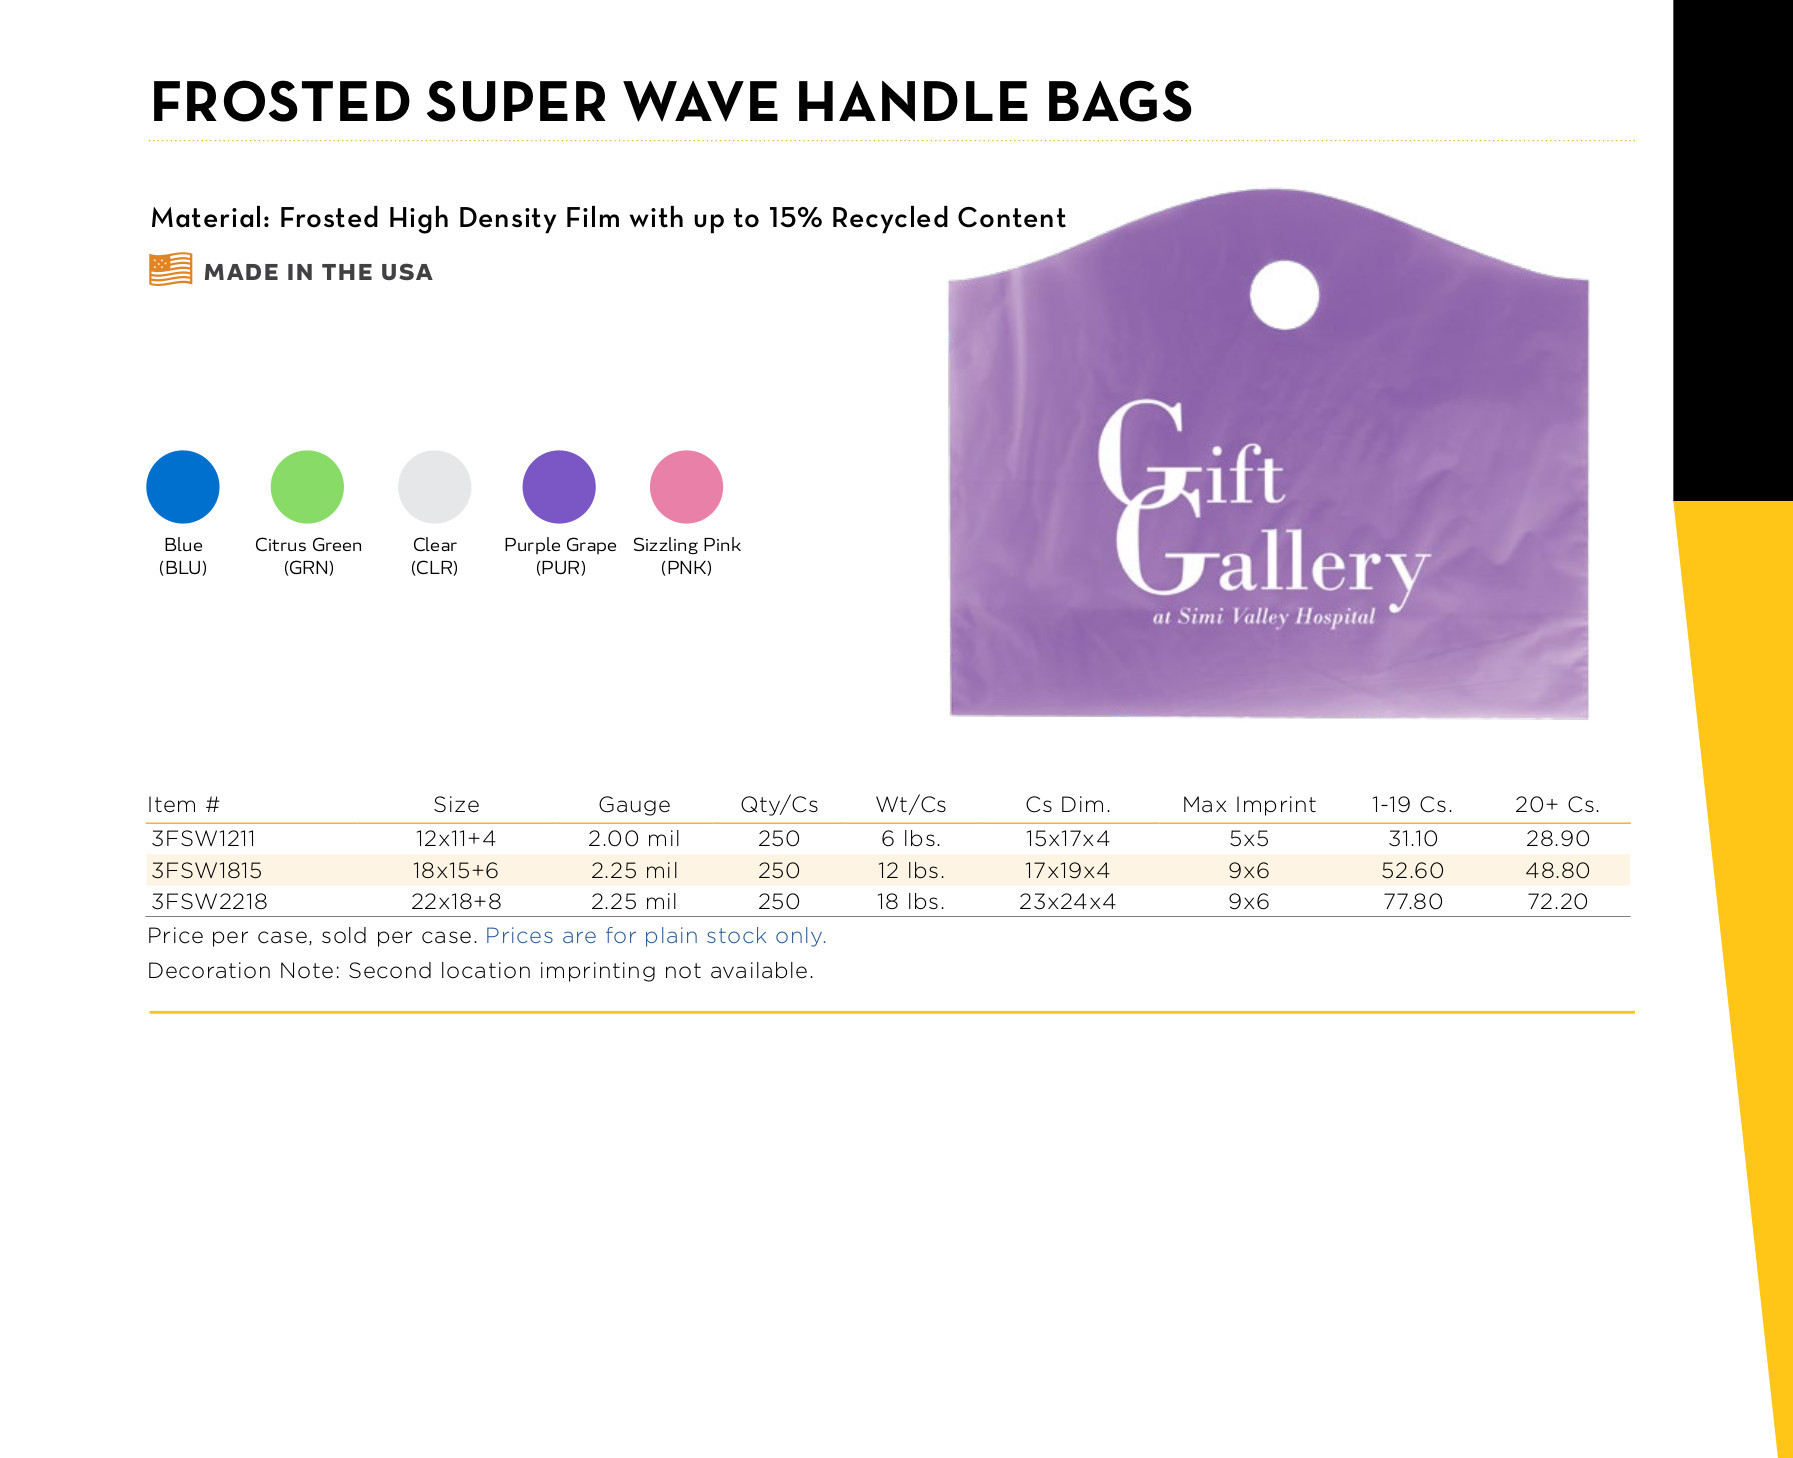 Frosted Super Wave Bags